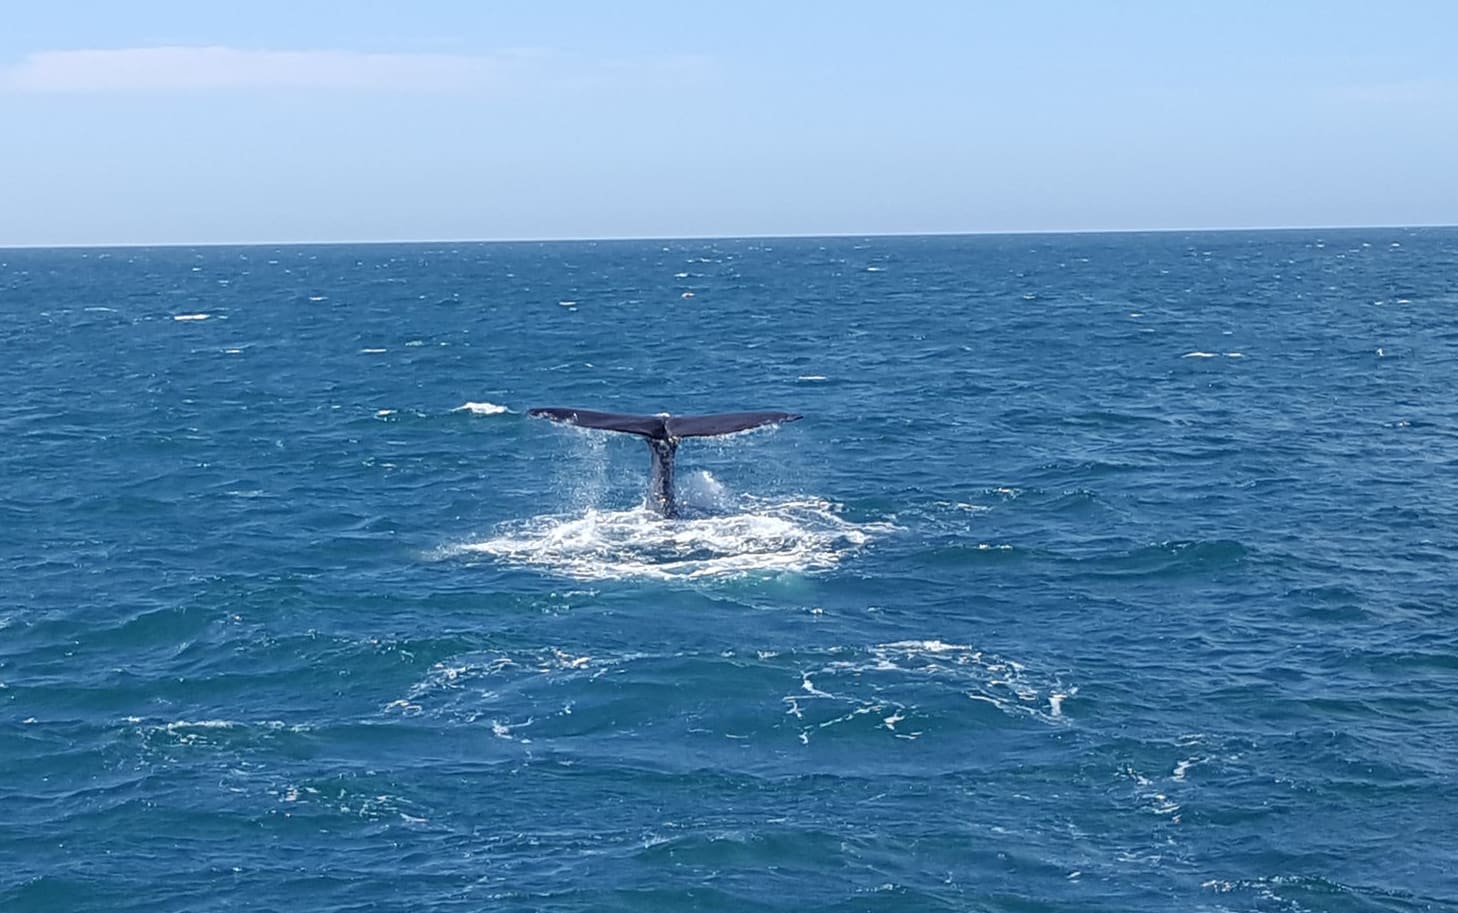 One of five whales spotted off the Kaikoura coast a week after the earthquakes.